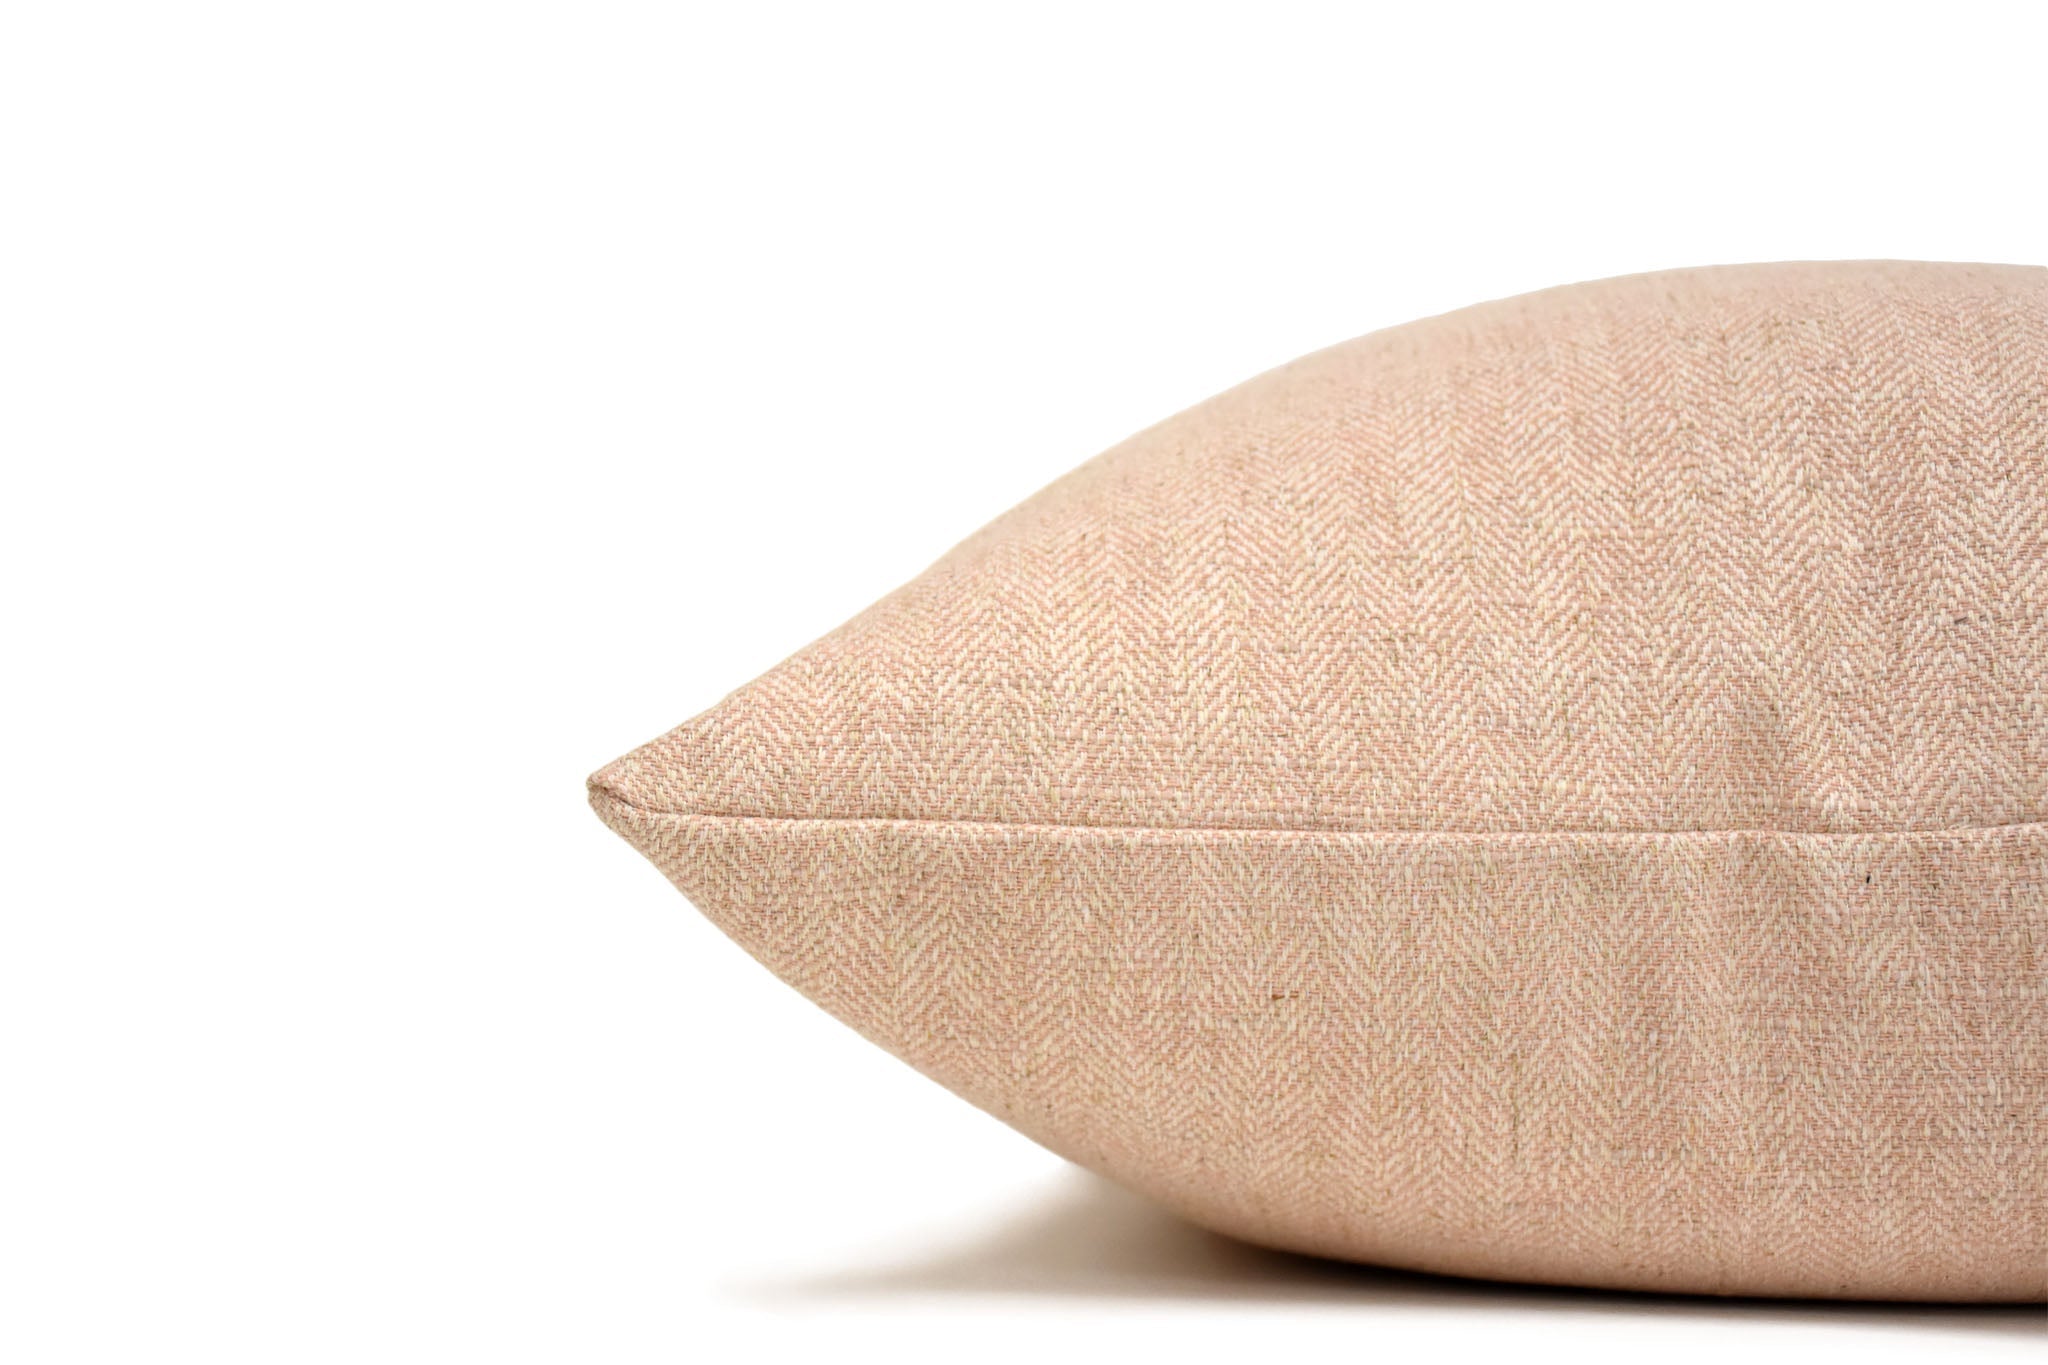 Blush Cushion Cover Cushion Cover Canadian Down & Feather Company 